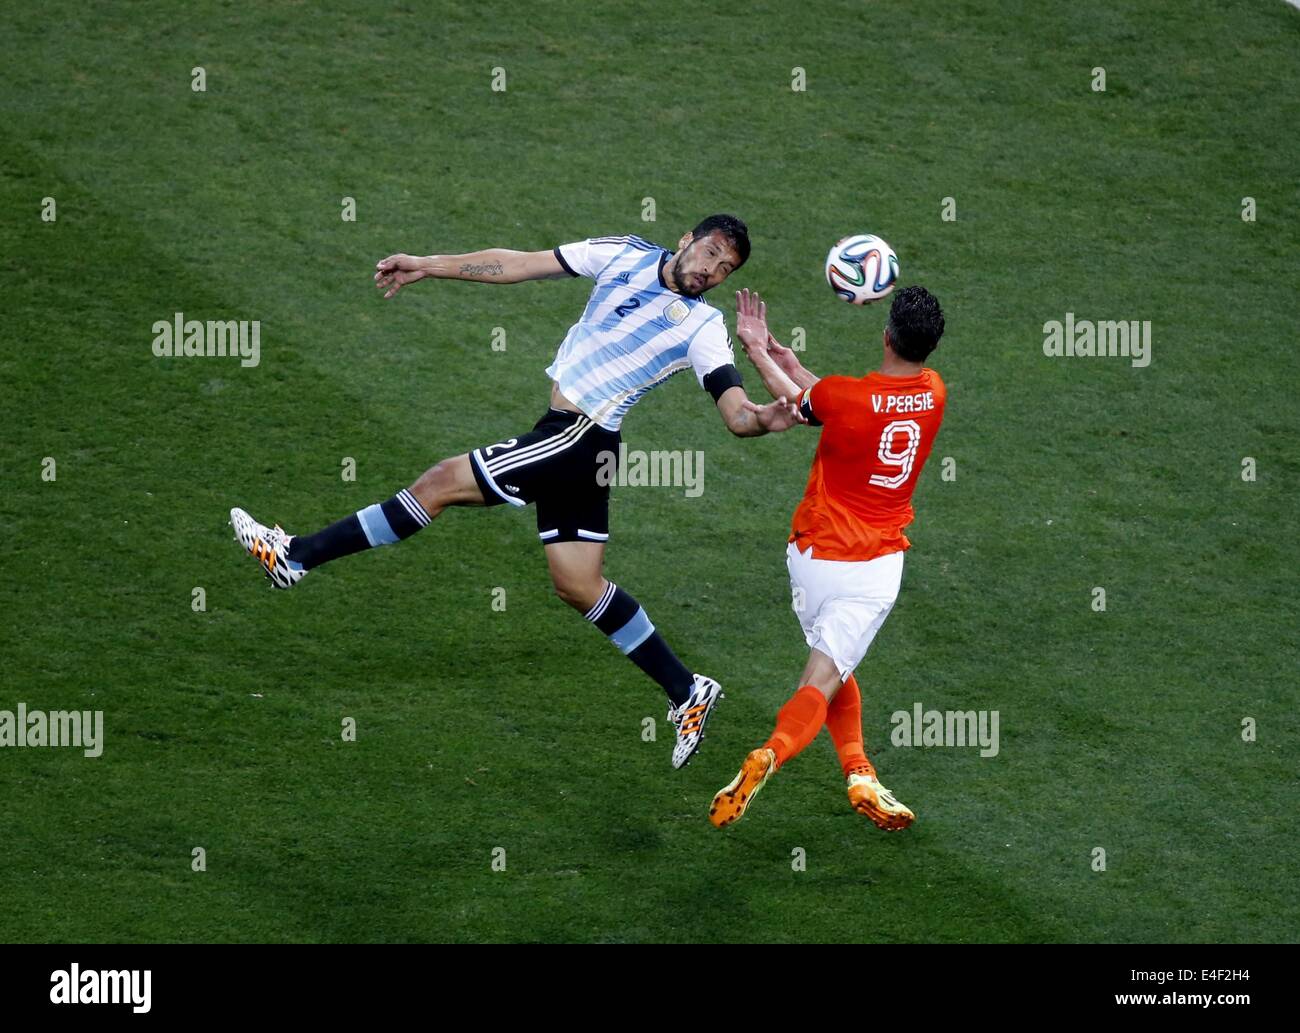 Sao Paulo, Brazil. 9th July, 2014. Netherlands' Robin van Persie vies with Argentina's Ezequiel Garay during a semifinal match between Netherlands and Argentina of 2014 FIFA World Cup at the Arena de Sao Paulo Stadium in Sao Paulo, Brazil, on July 9, 2014. Credit:  Liao Yujie/Xinhua/Alamy Live News Stock Photo